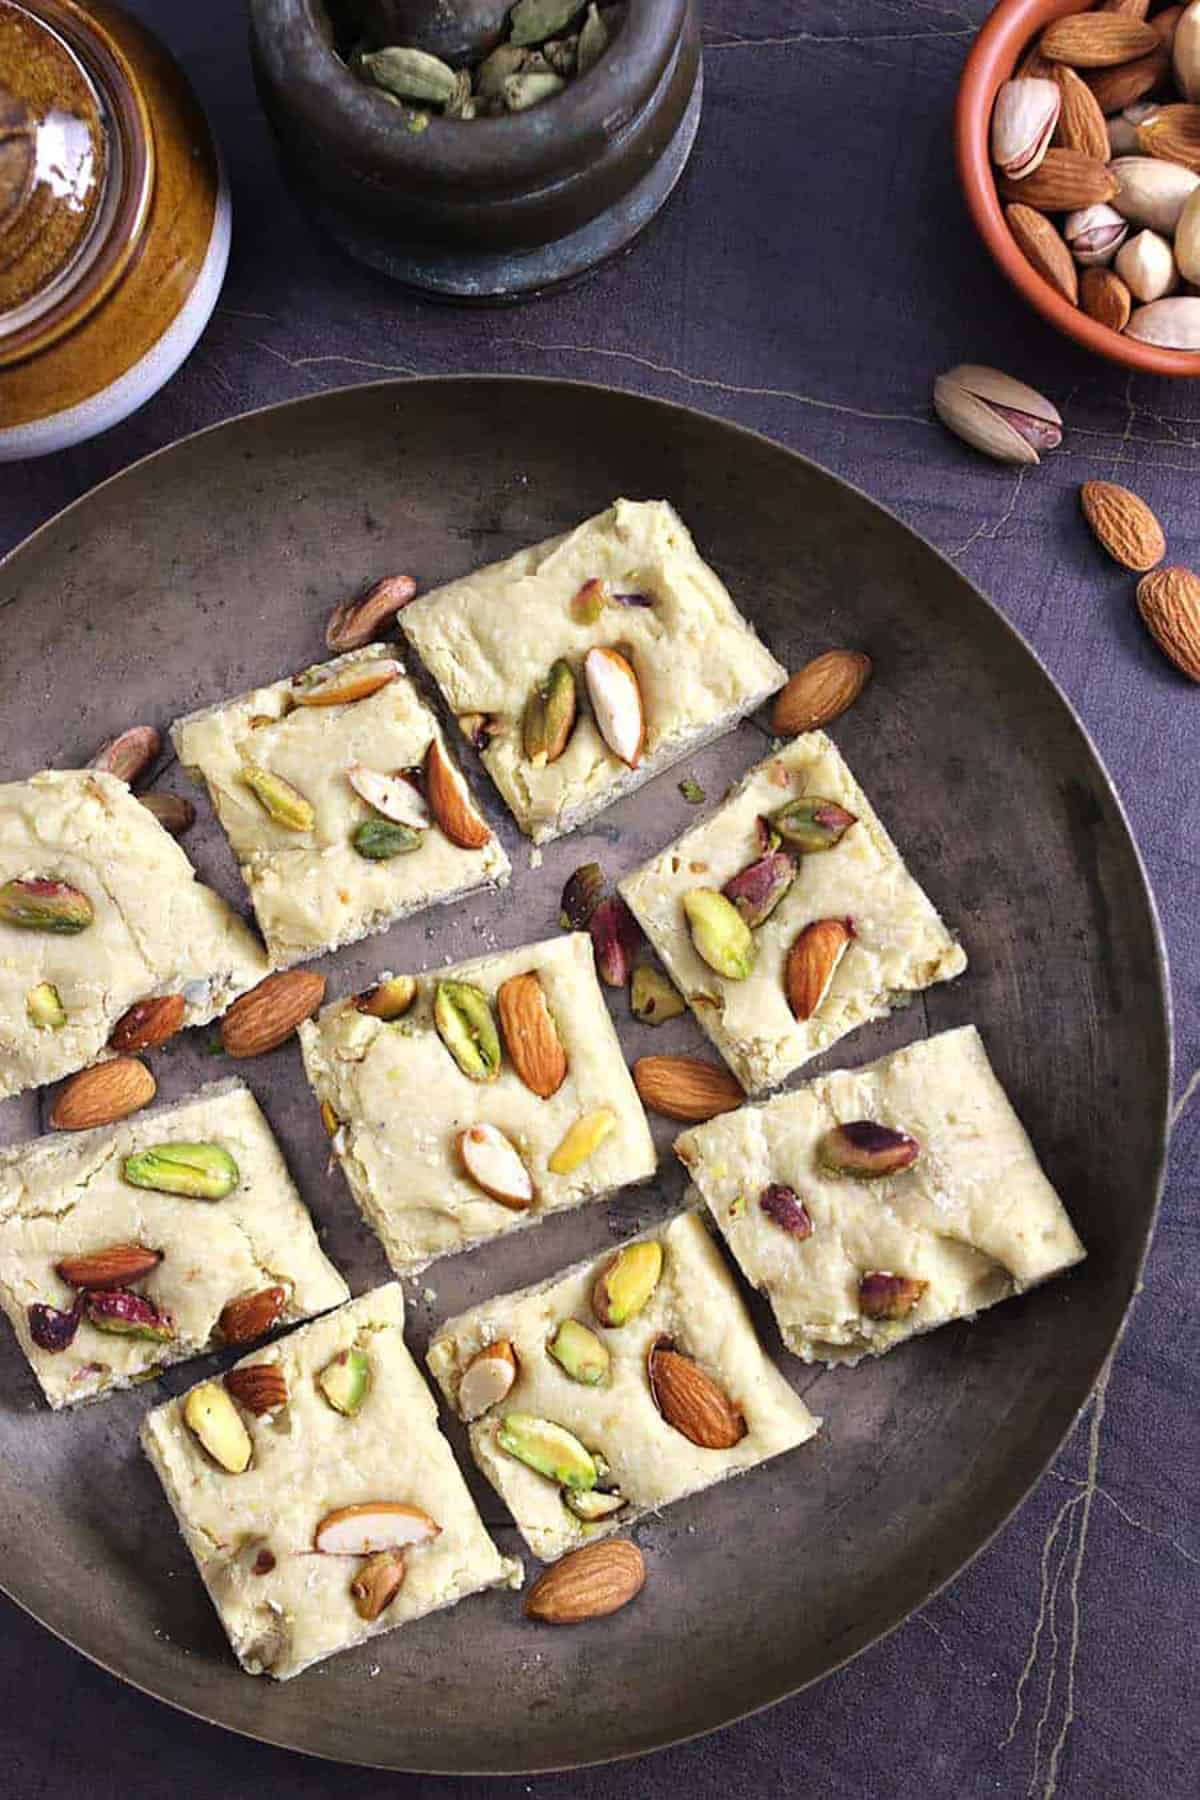 7 cups sweet, seven cup burfi on brass plate ready to be served for Diwali